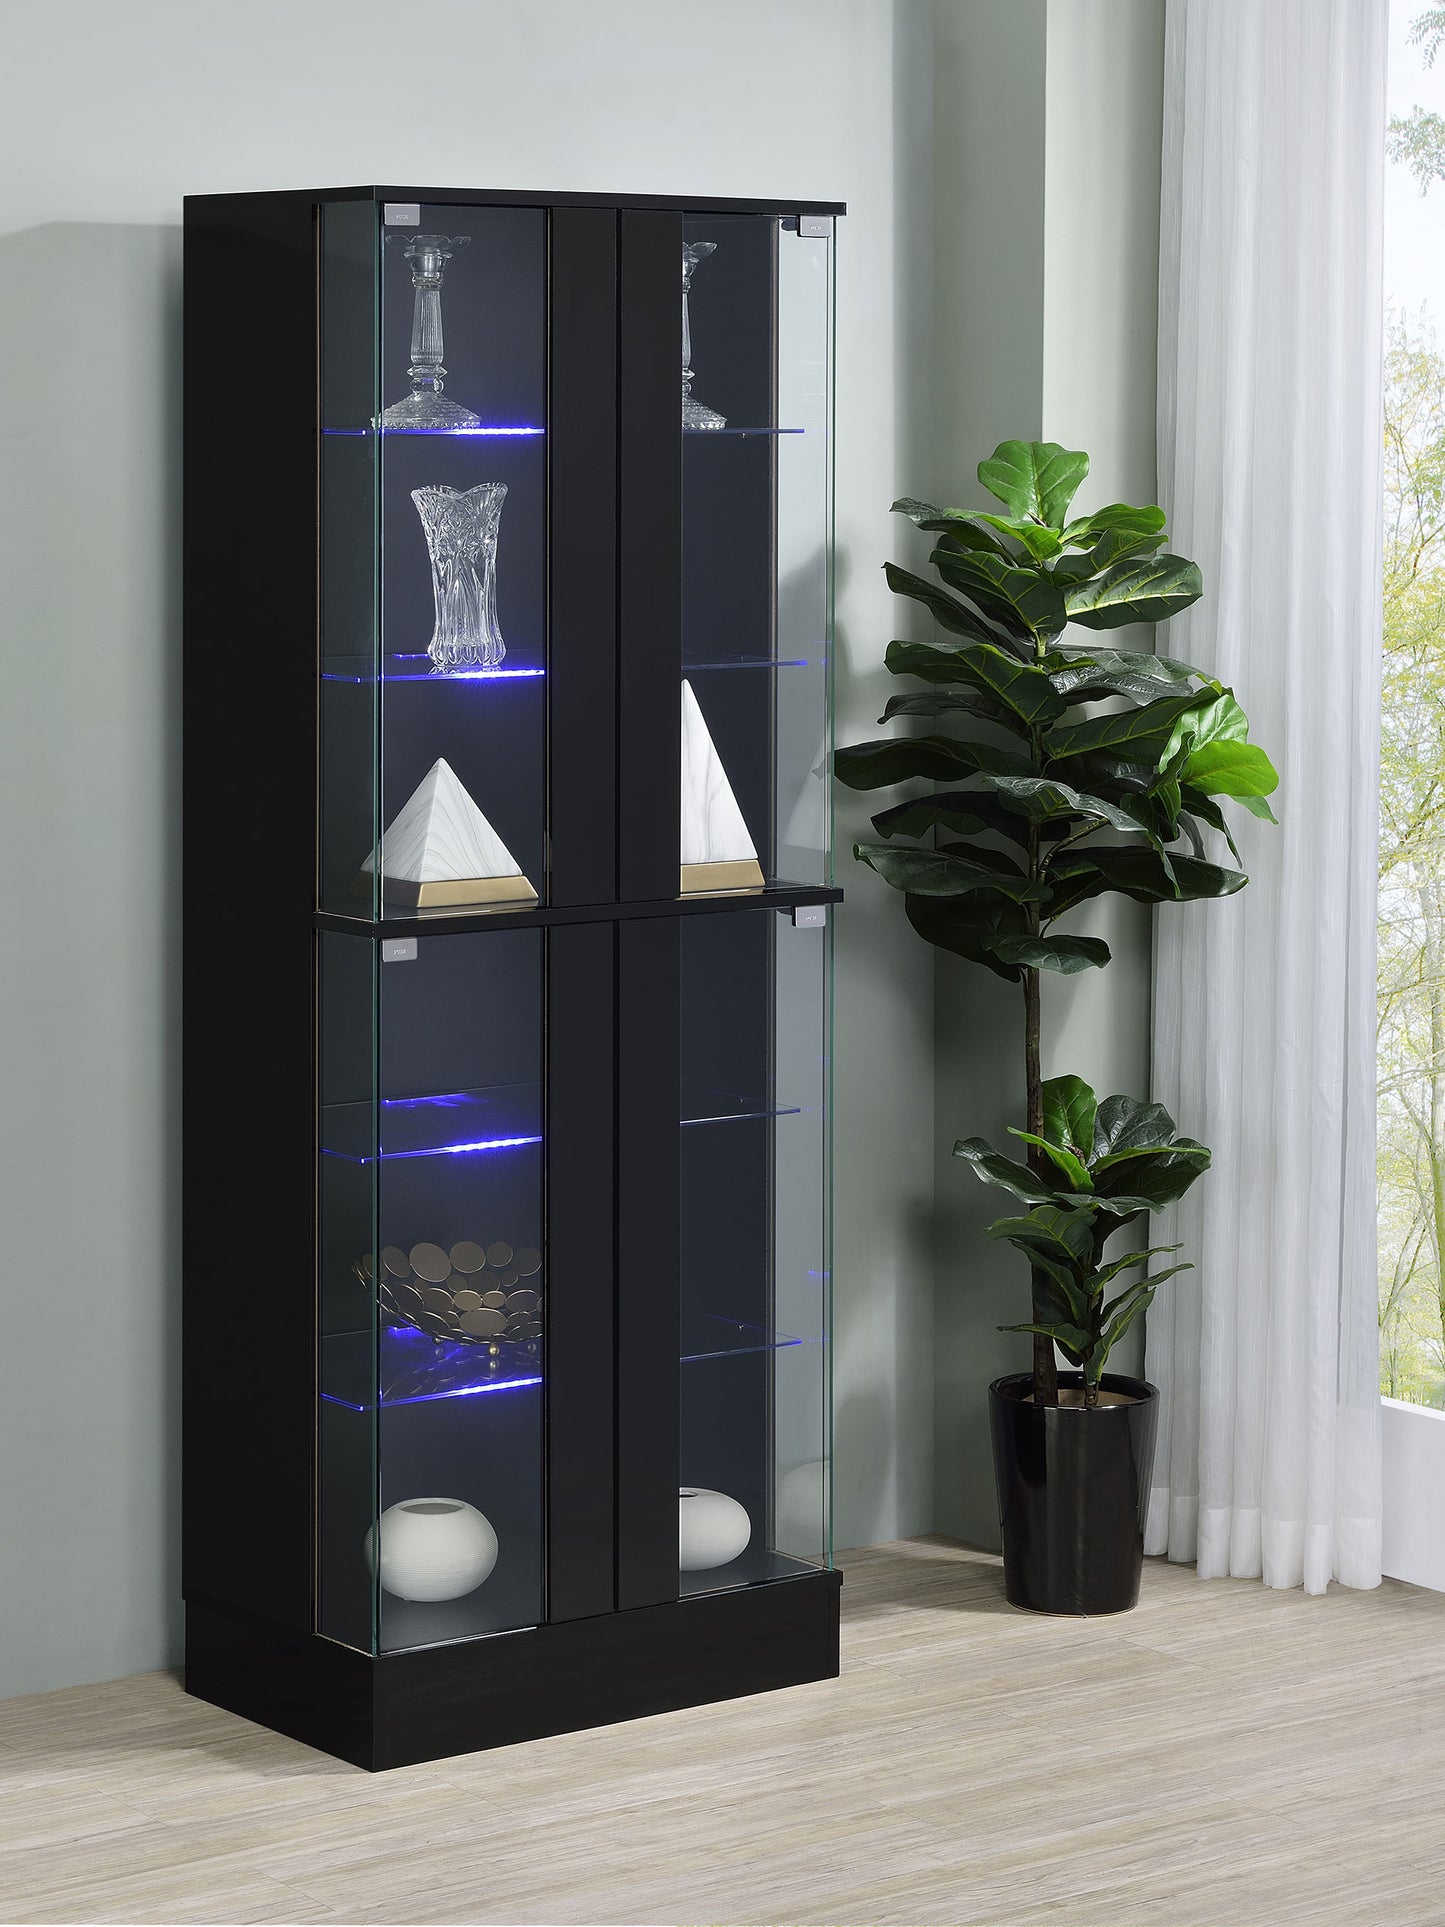 Cabra Display Case Curio Cabinet with Glass Shelves and LED Lighting Black High Gloss